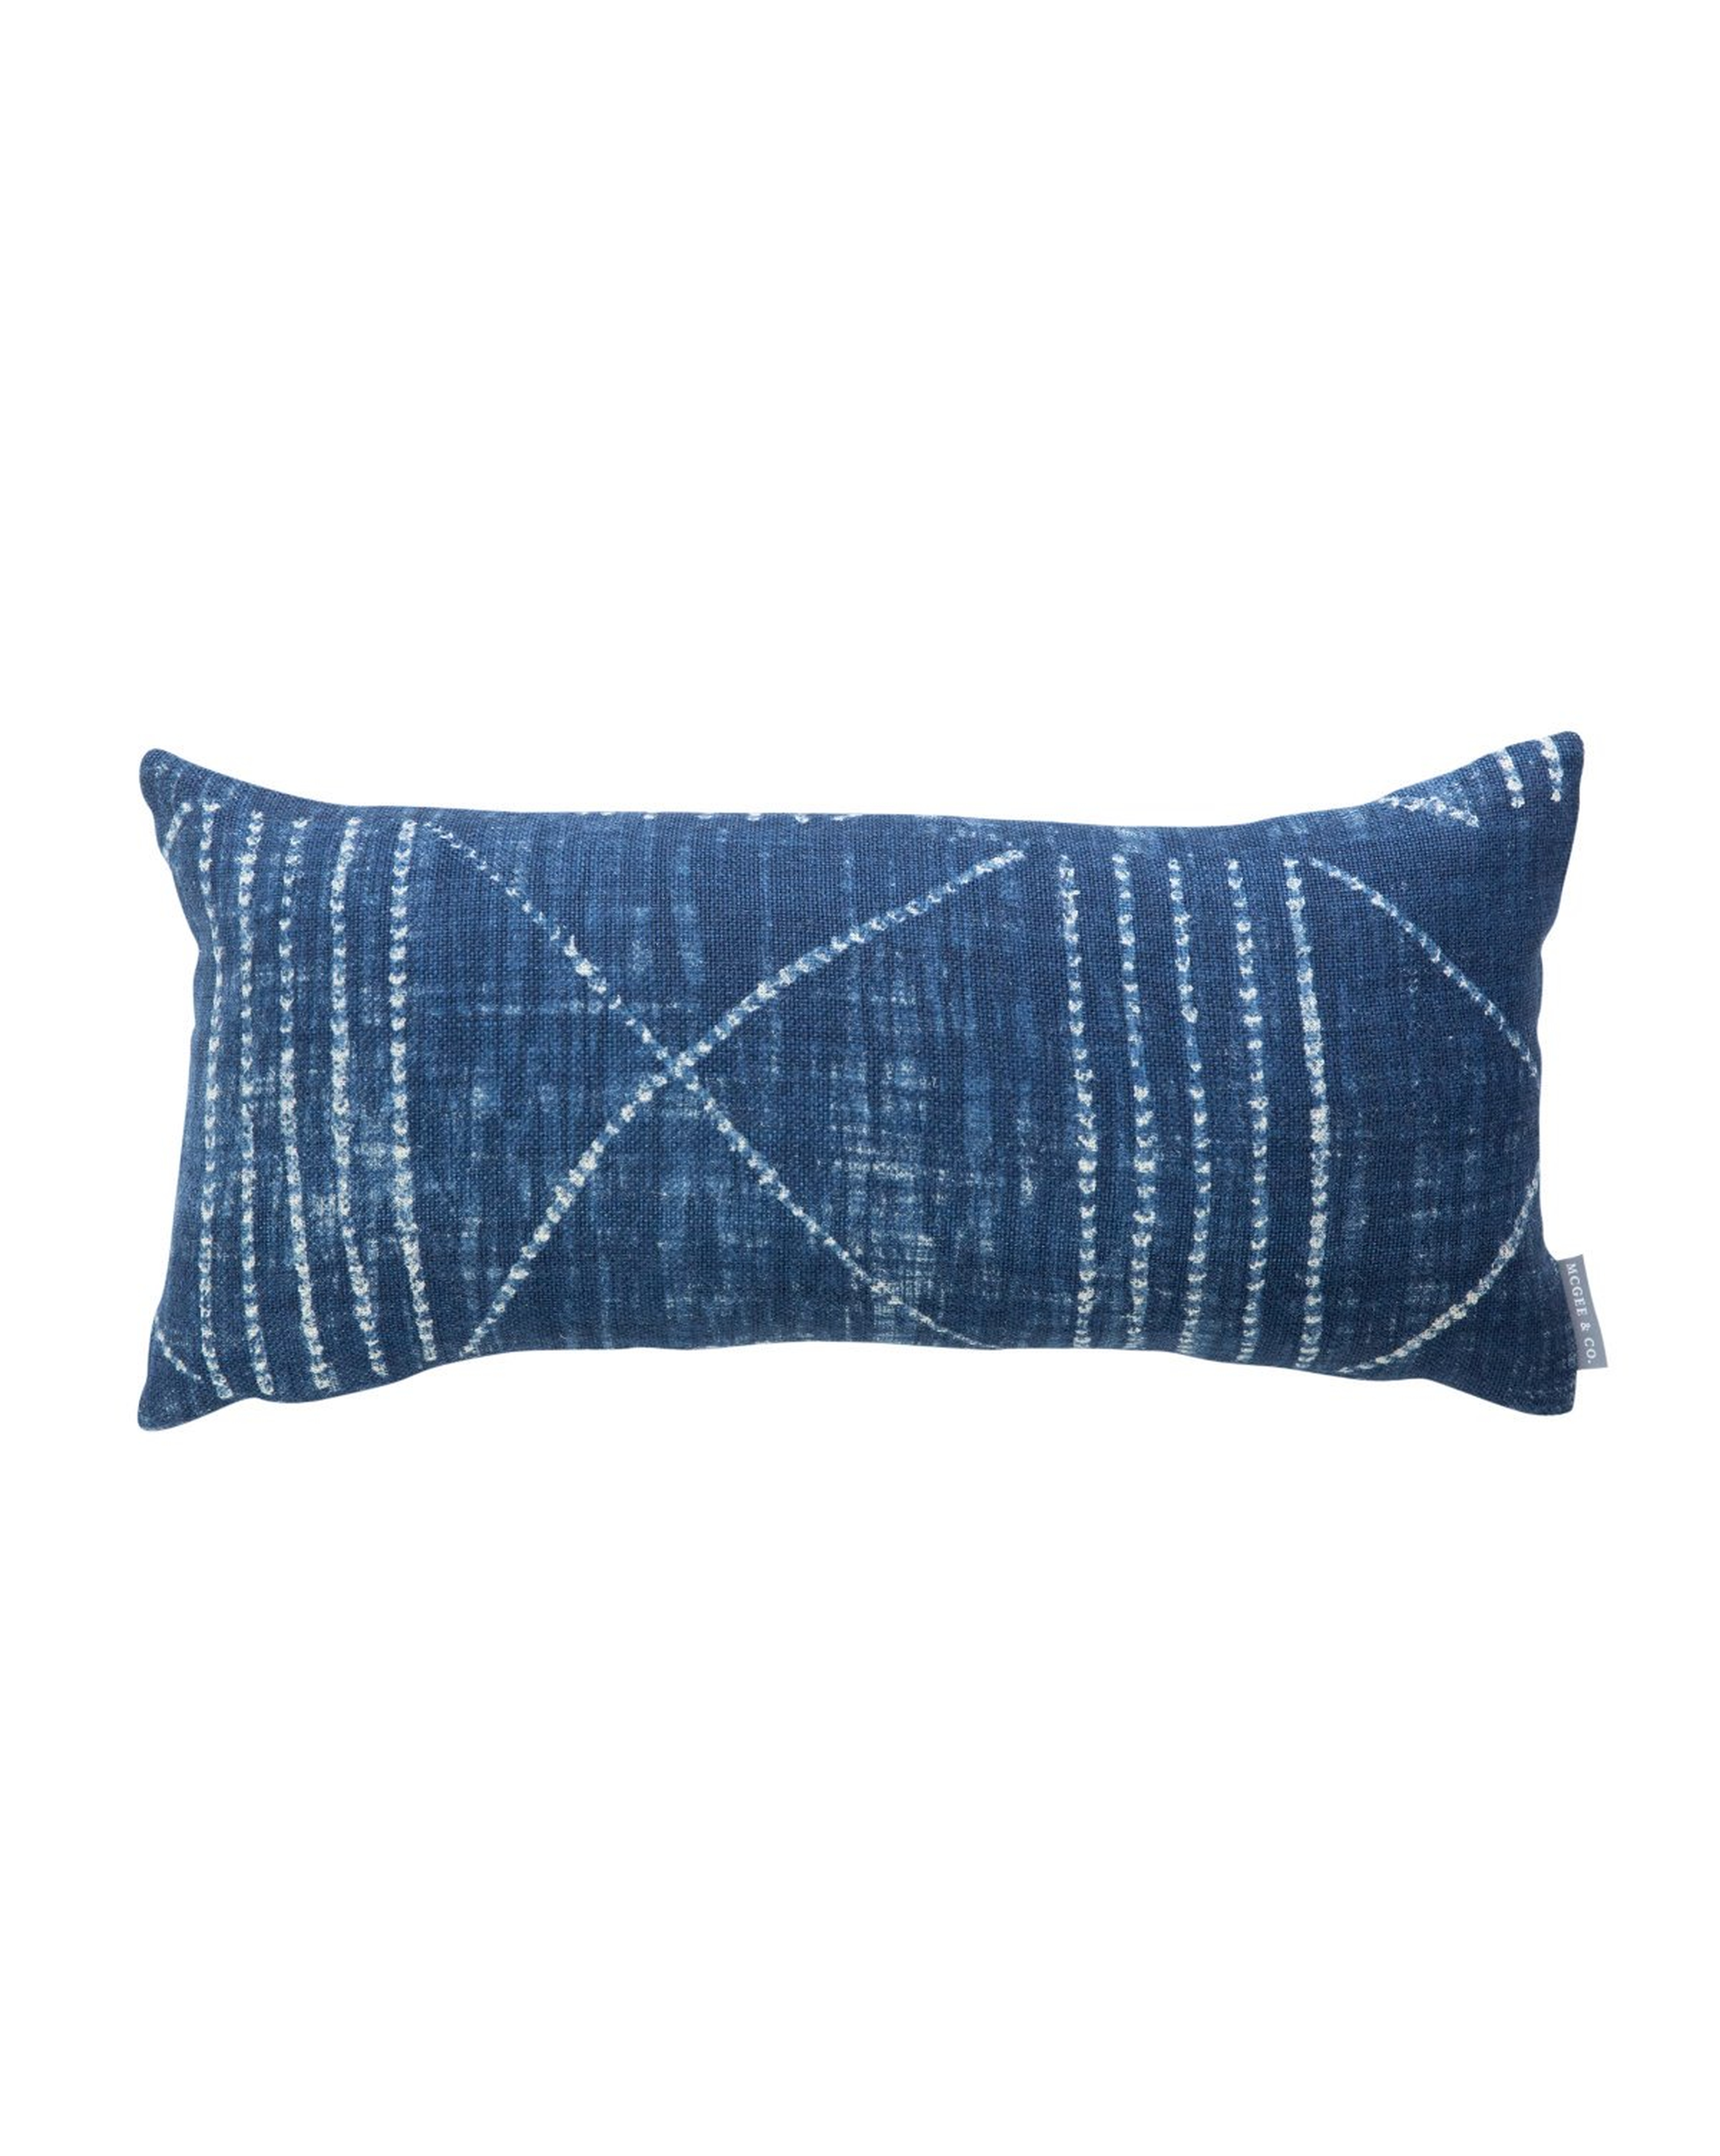 NINA PILLOW WITHOUT INSERT, 12" x 24" - McGee & Co.